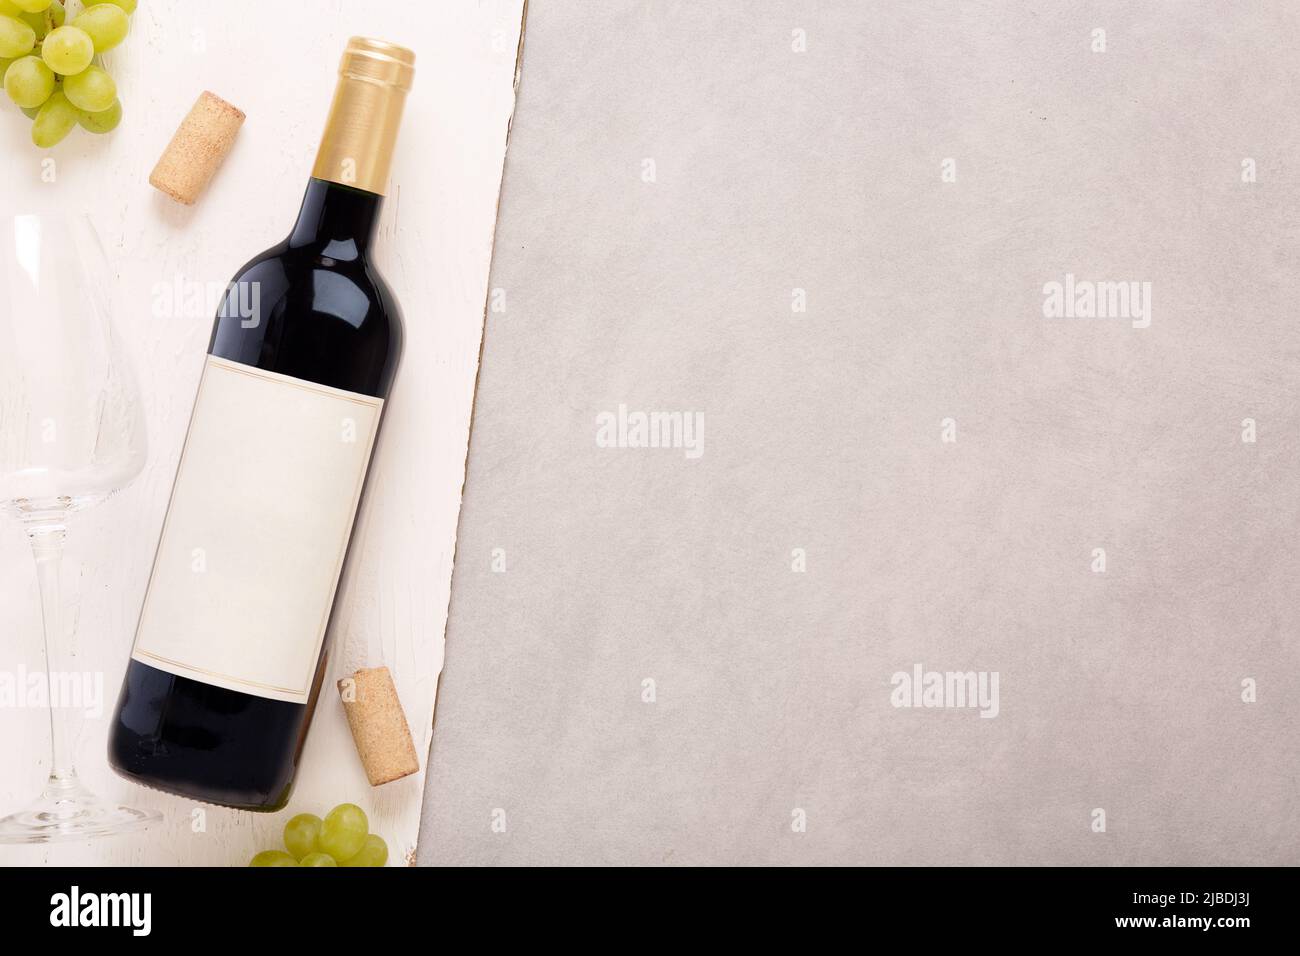 Bottle of white wine with label. Glass of wine and cork. Wine bottle mockup. Top view. Stock Photo